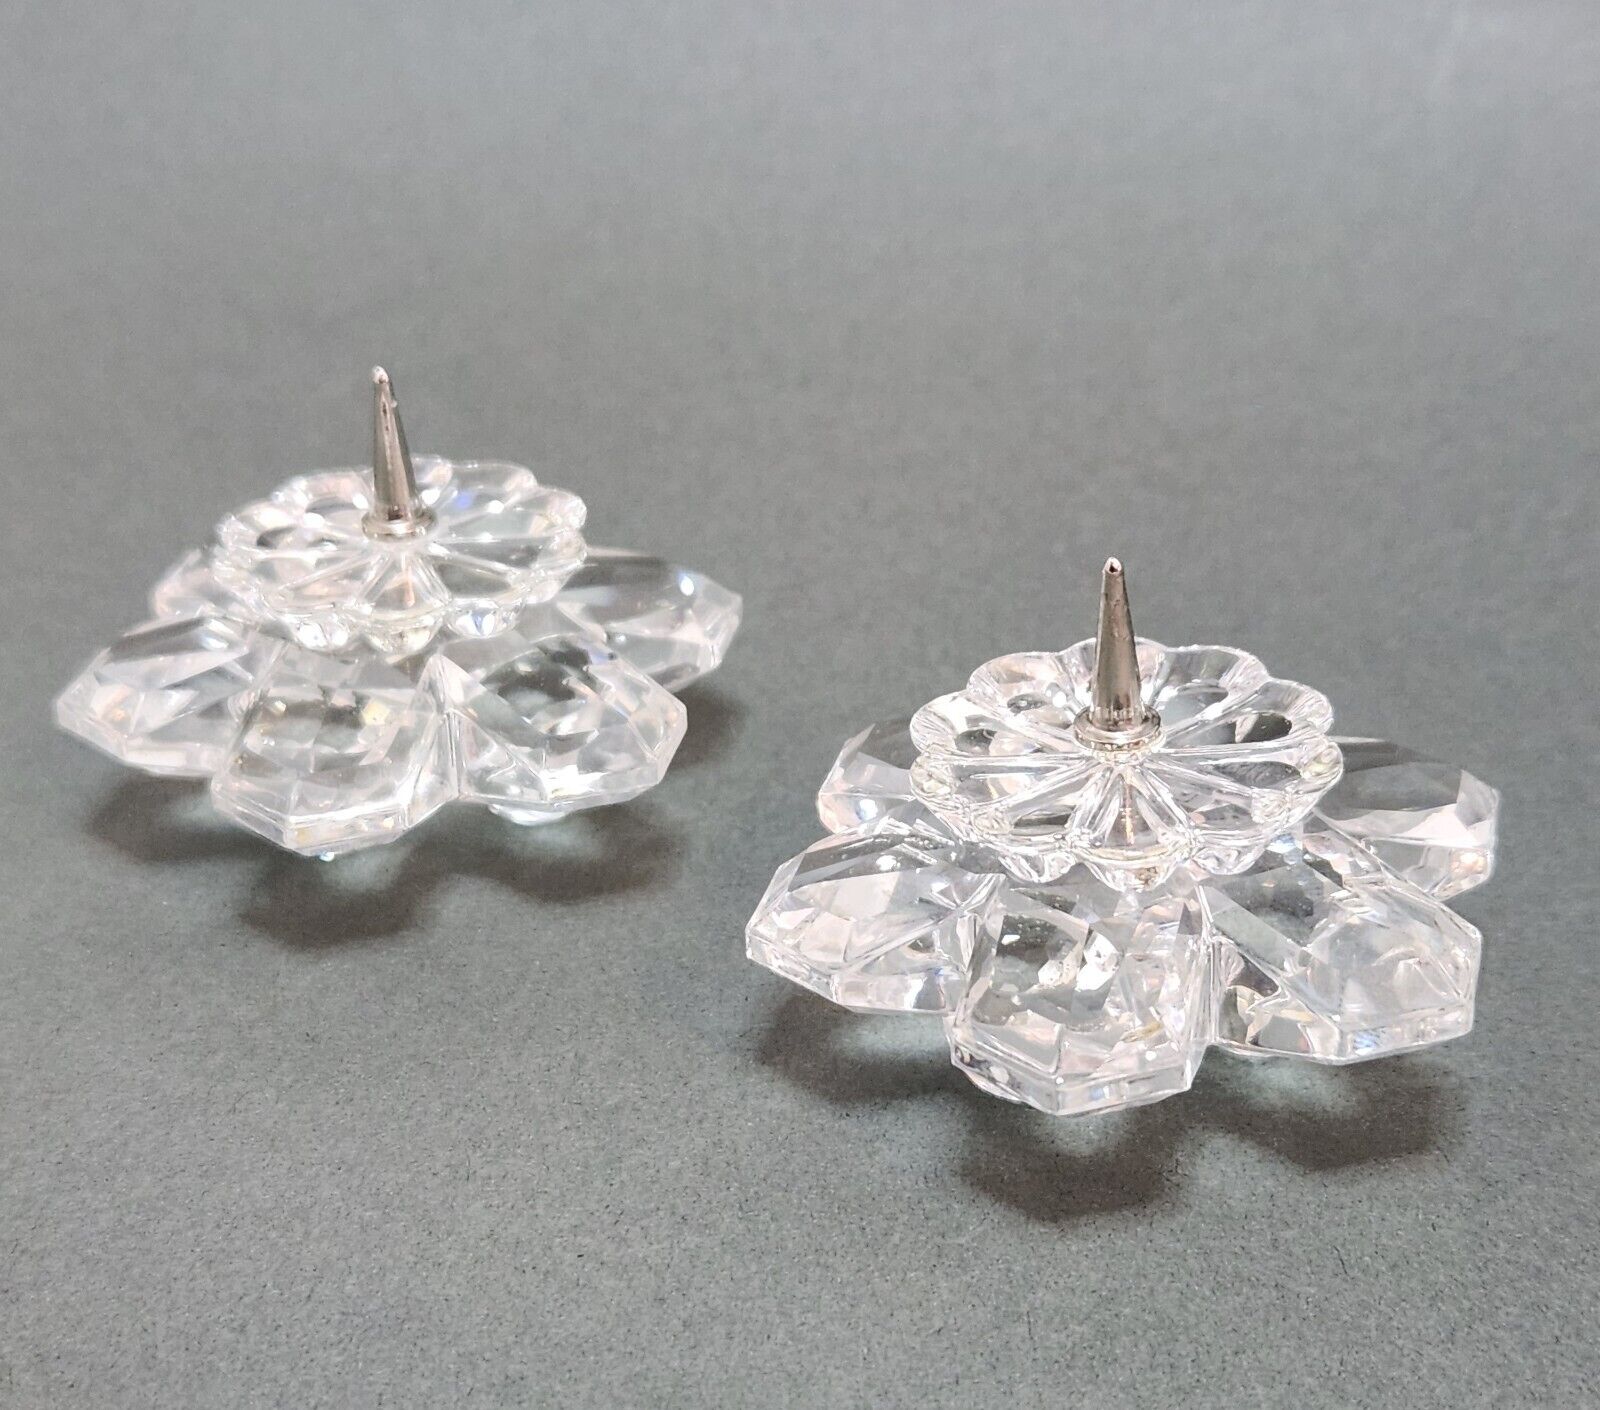 SWAROVSKI CRYSTAL CANDLEHOLDER #7600 101 FLOWER CANDLE HOLDERS SMALL PIN TYPE